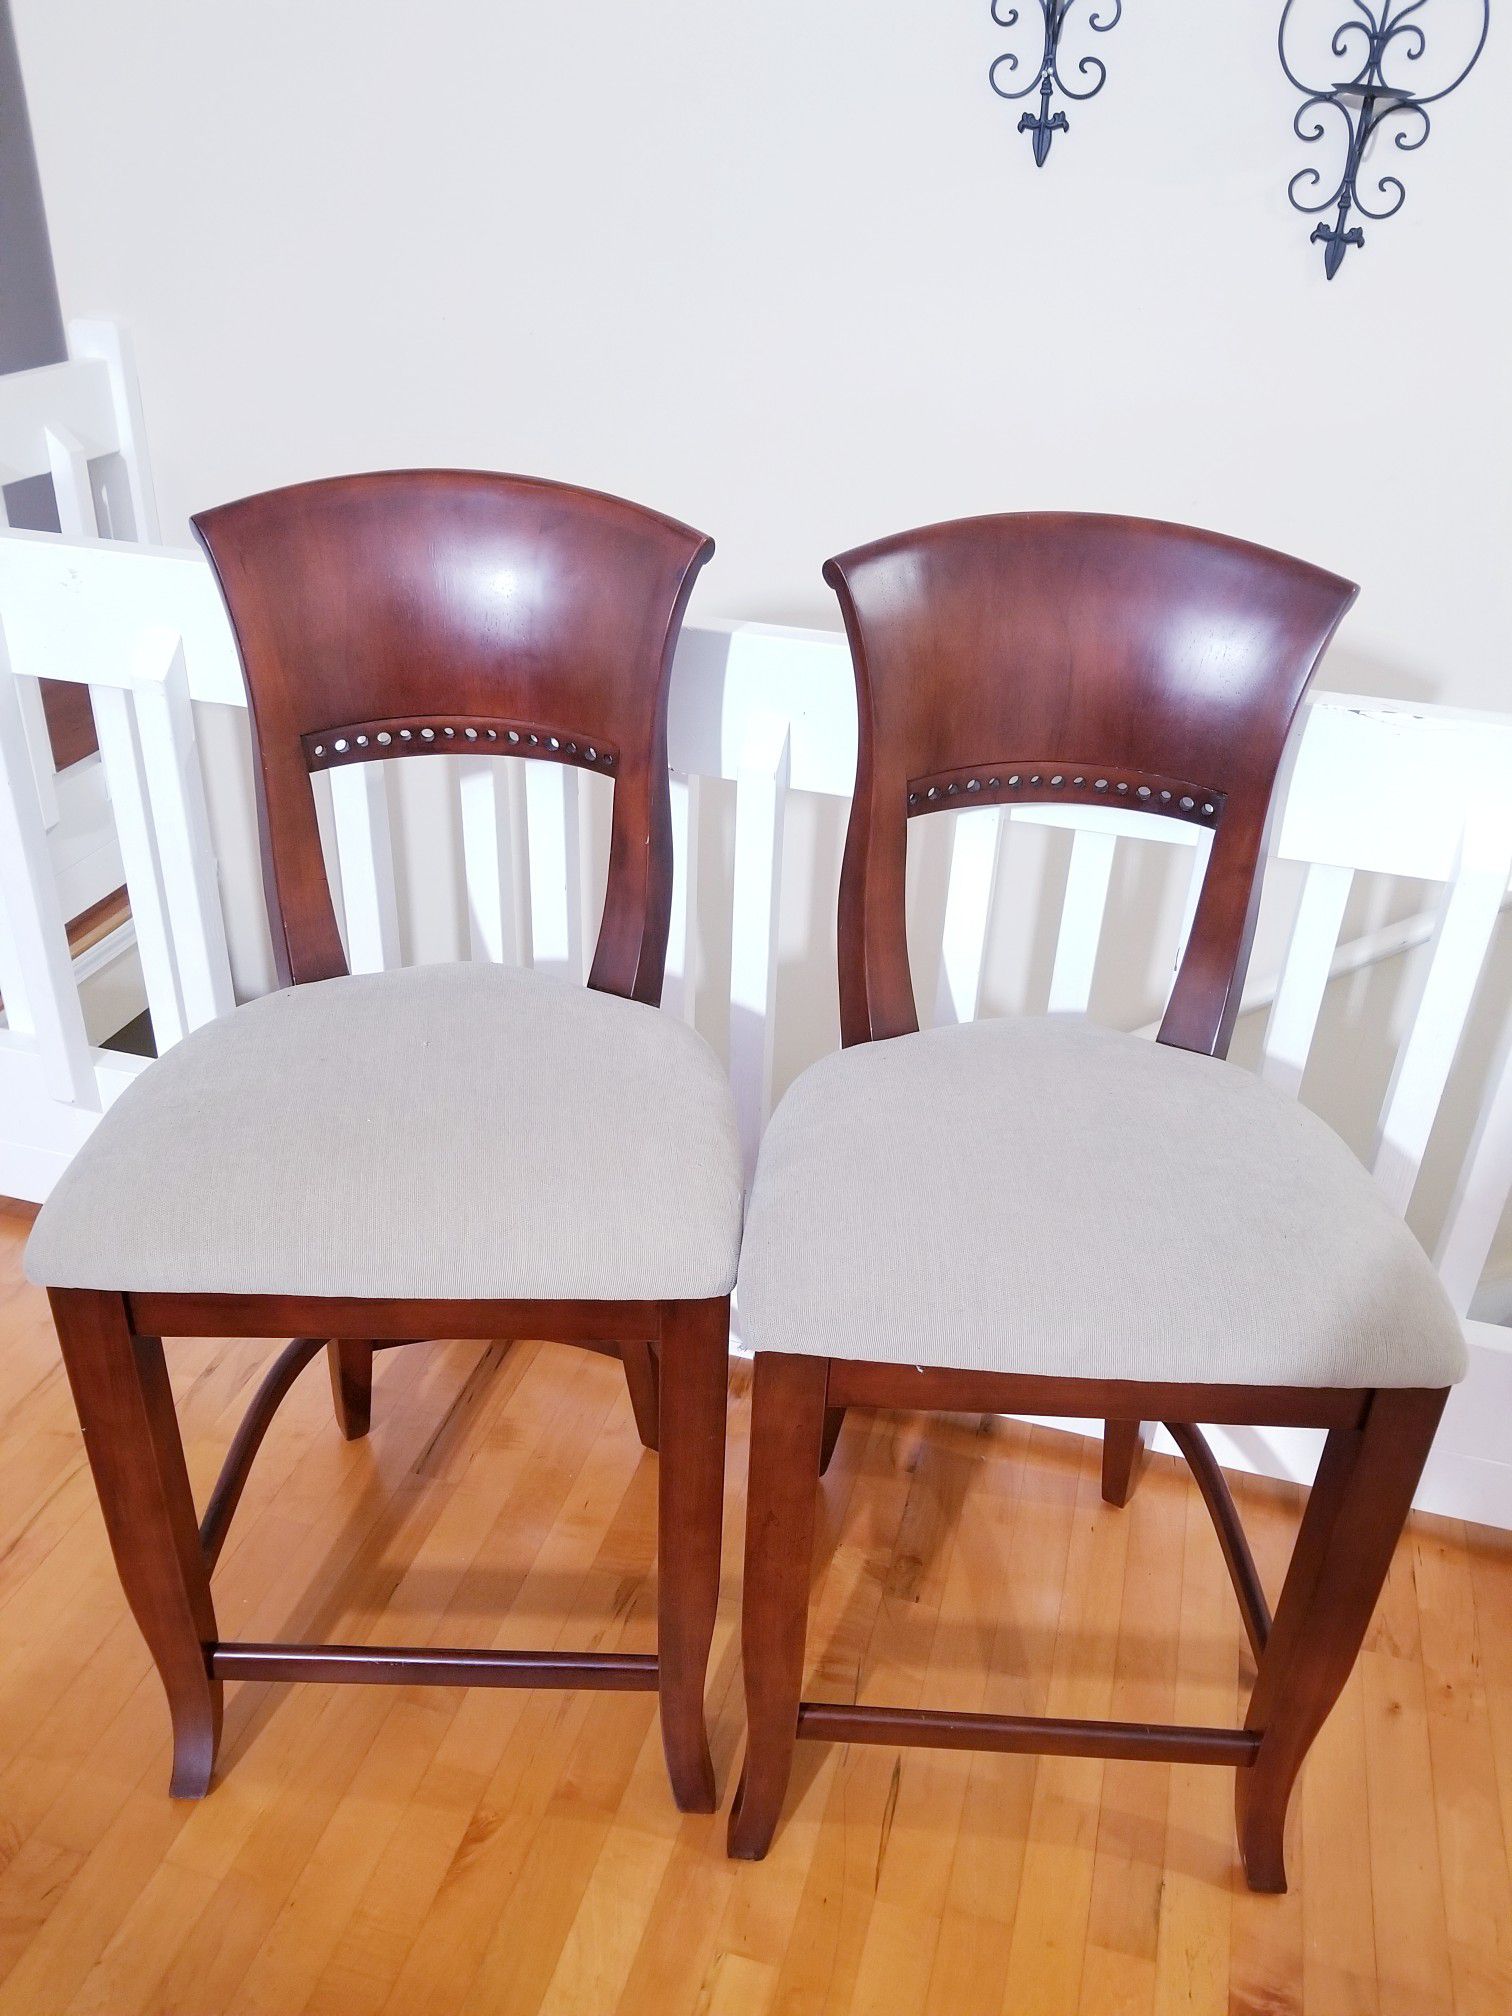 🔥🔥HOT DEAL🔥🔥Counter height walnut wood chairs